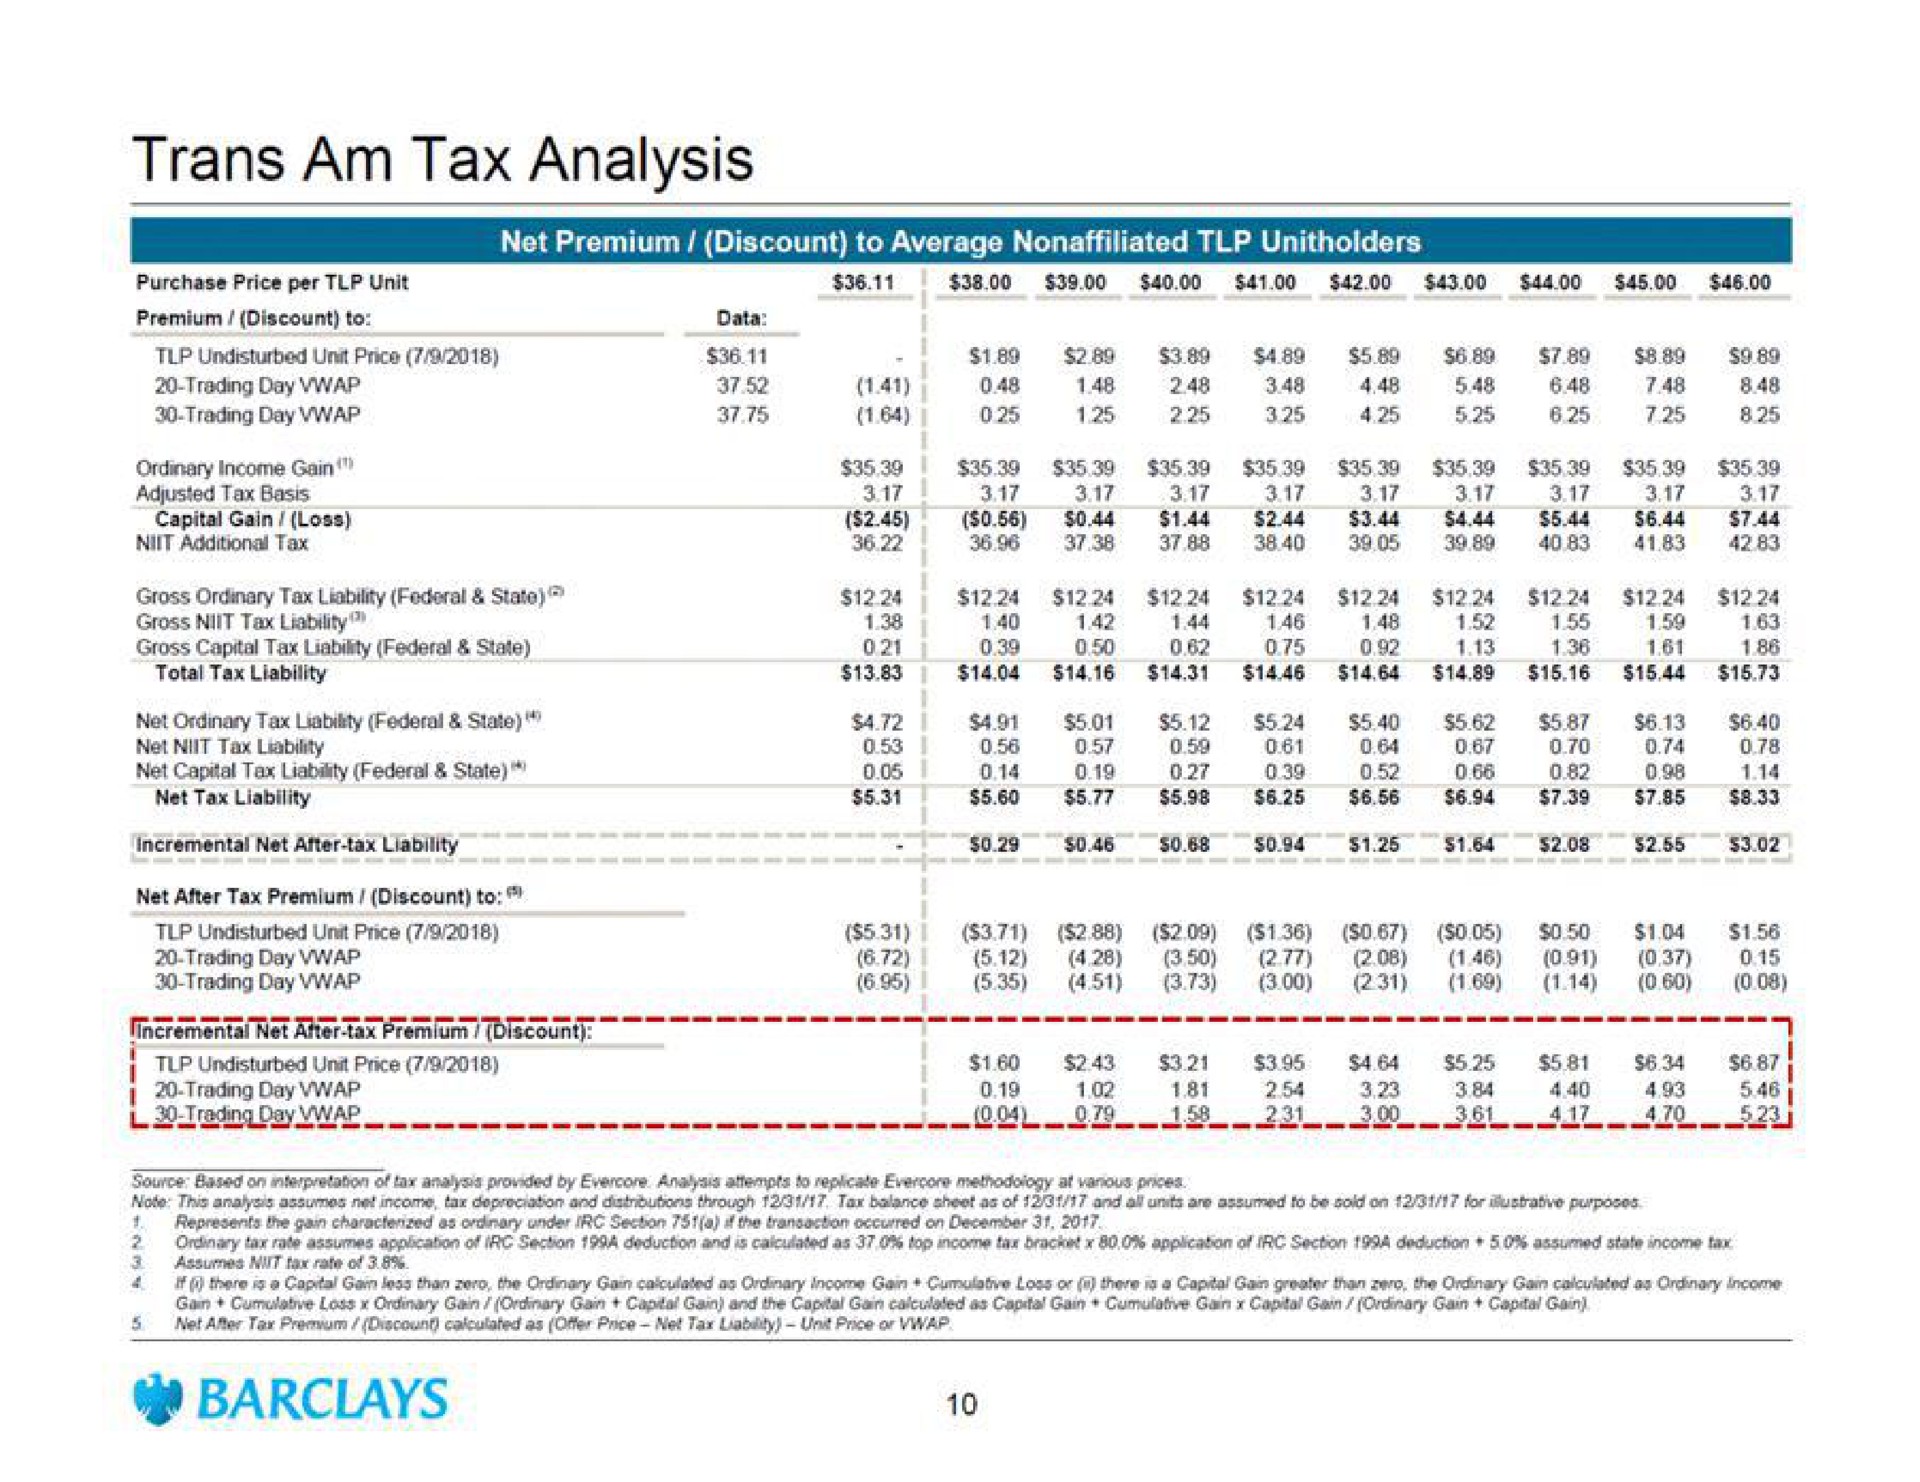 am tax analysis net premium discount to average nonaffiliated at sen anes seen a a i a a is | Barclays